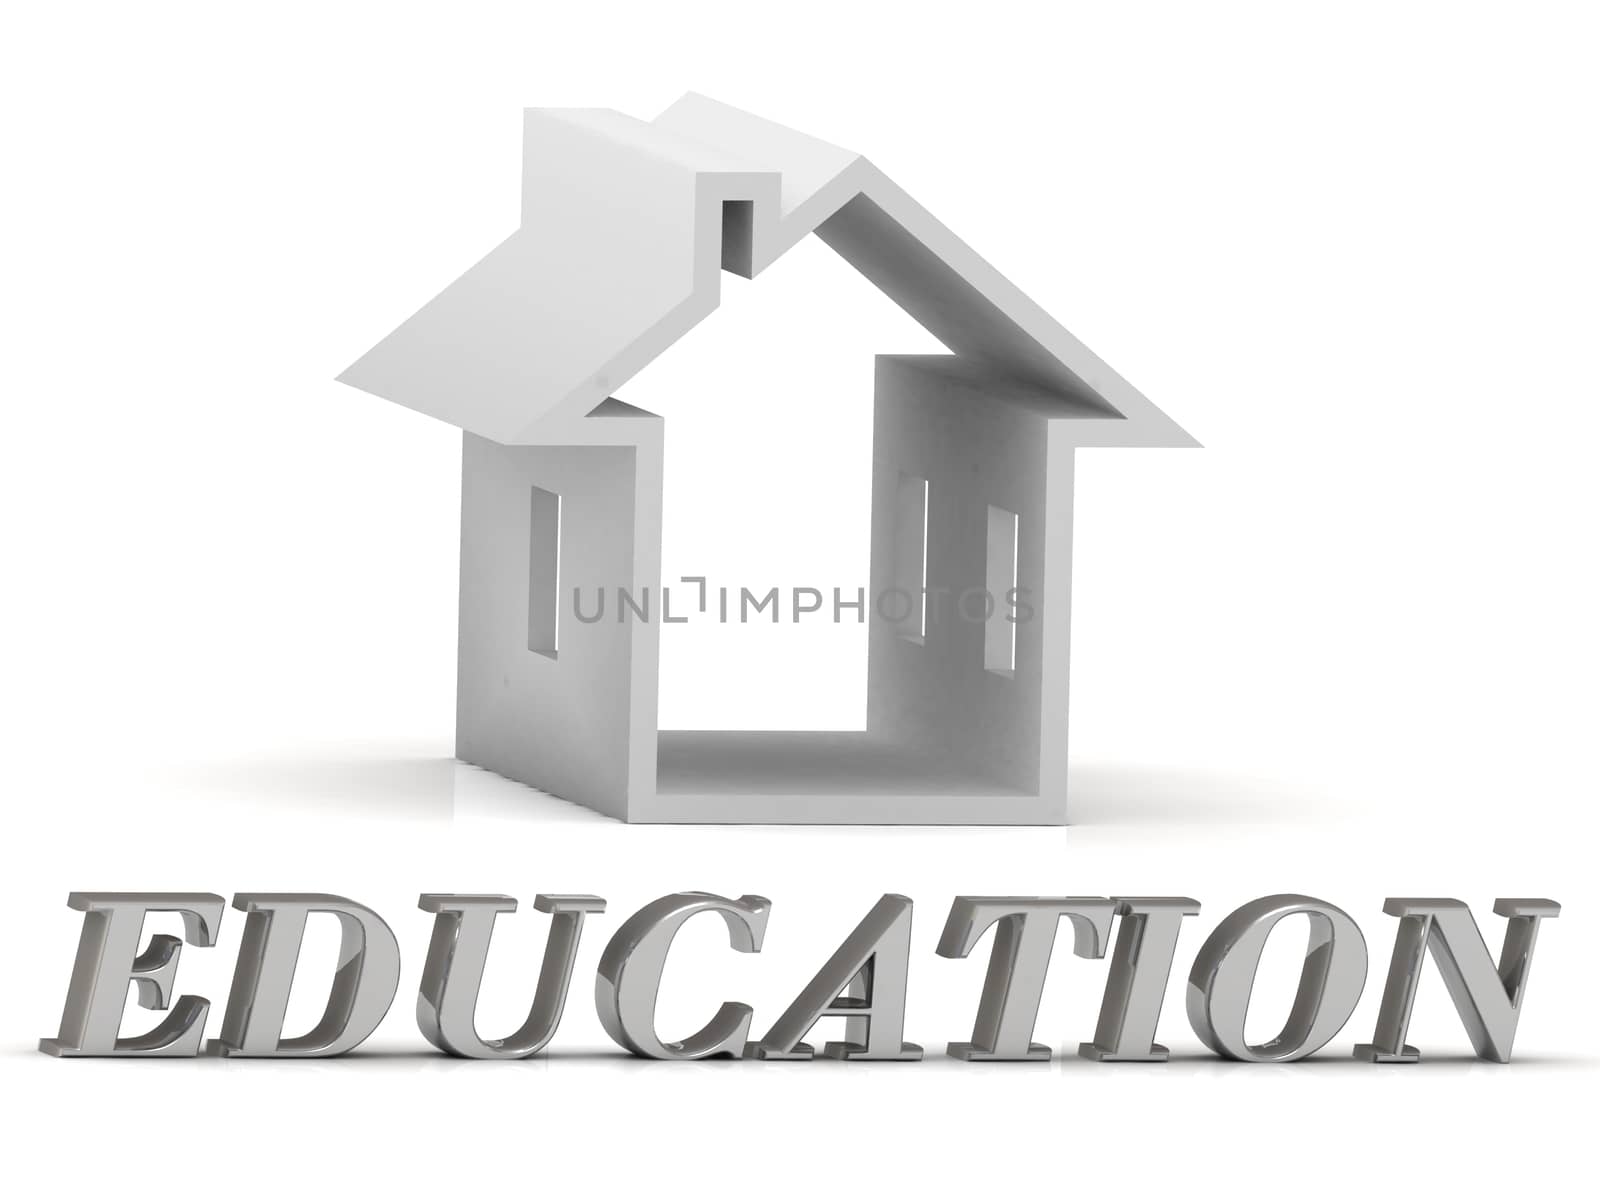 EDUCATION- inscription of silver letters and white house on white background